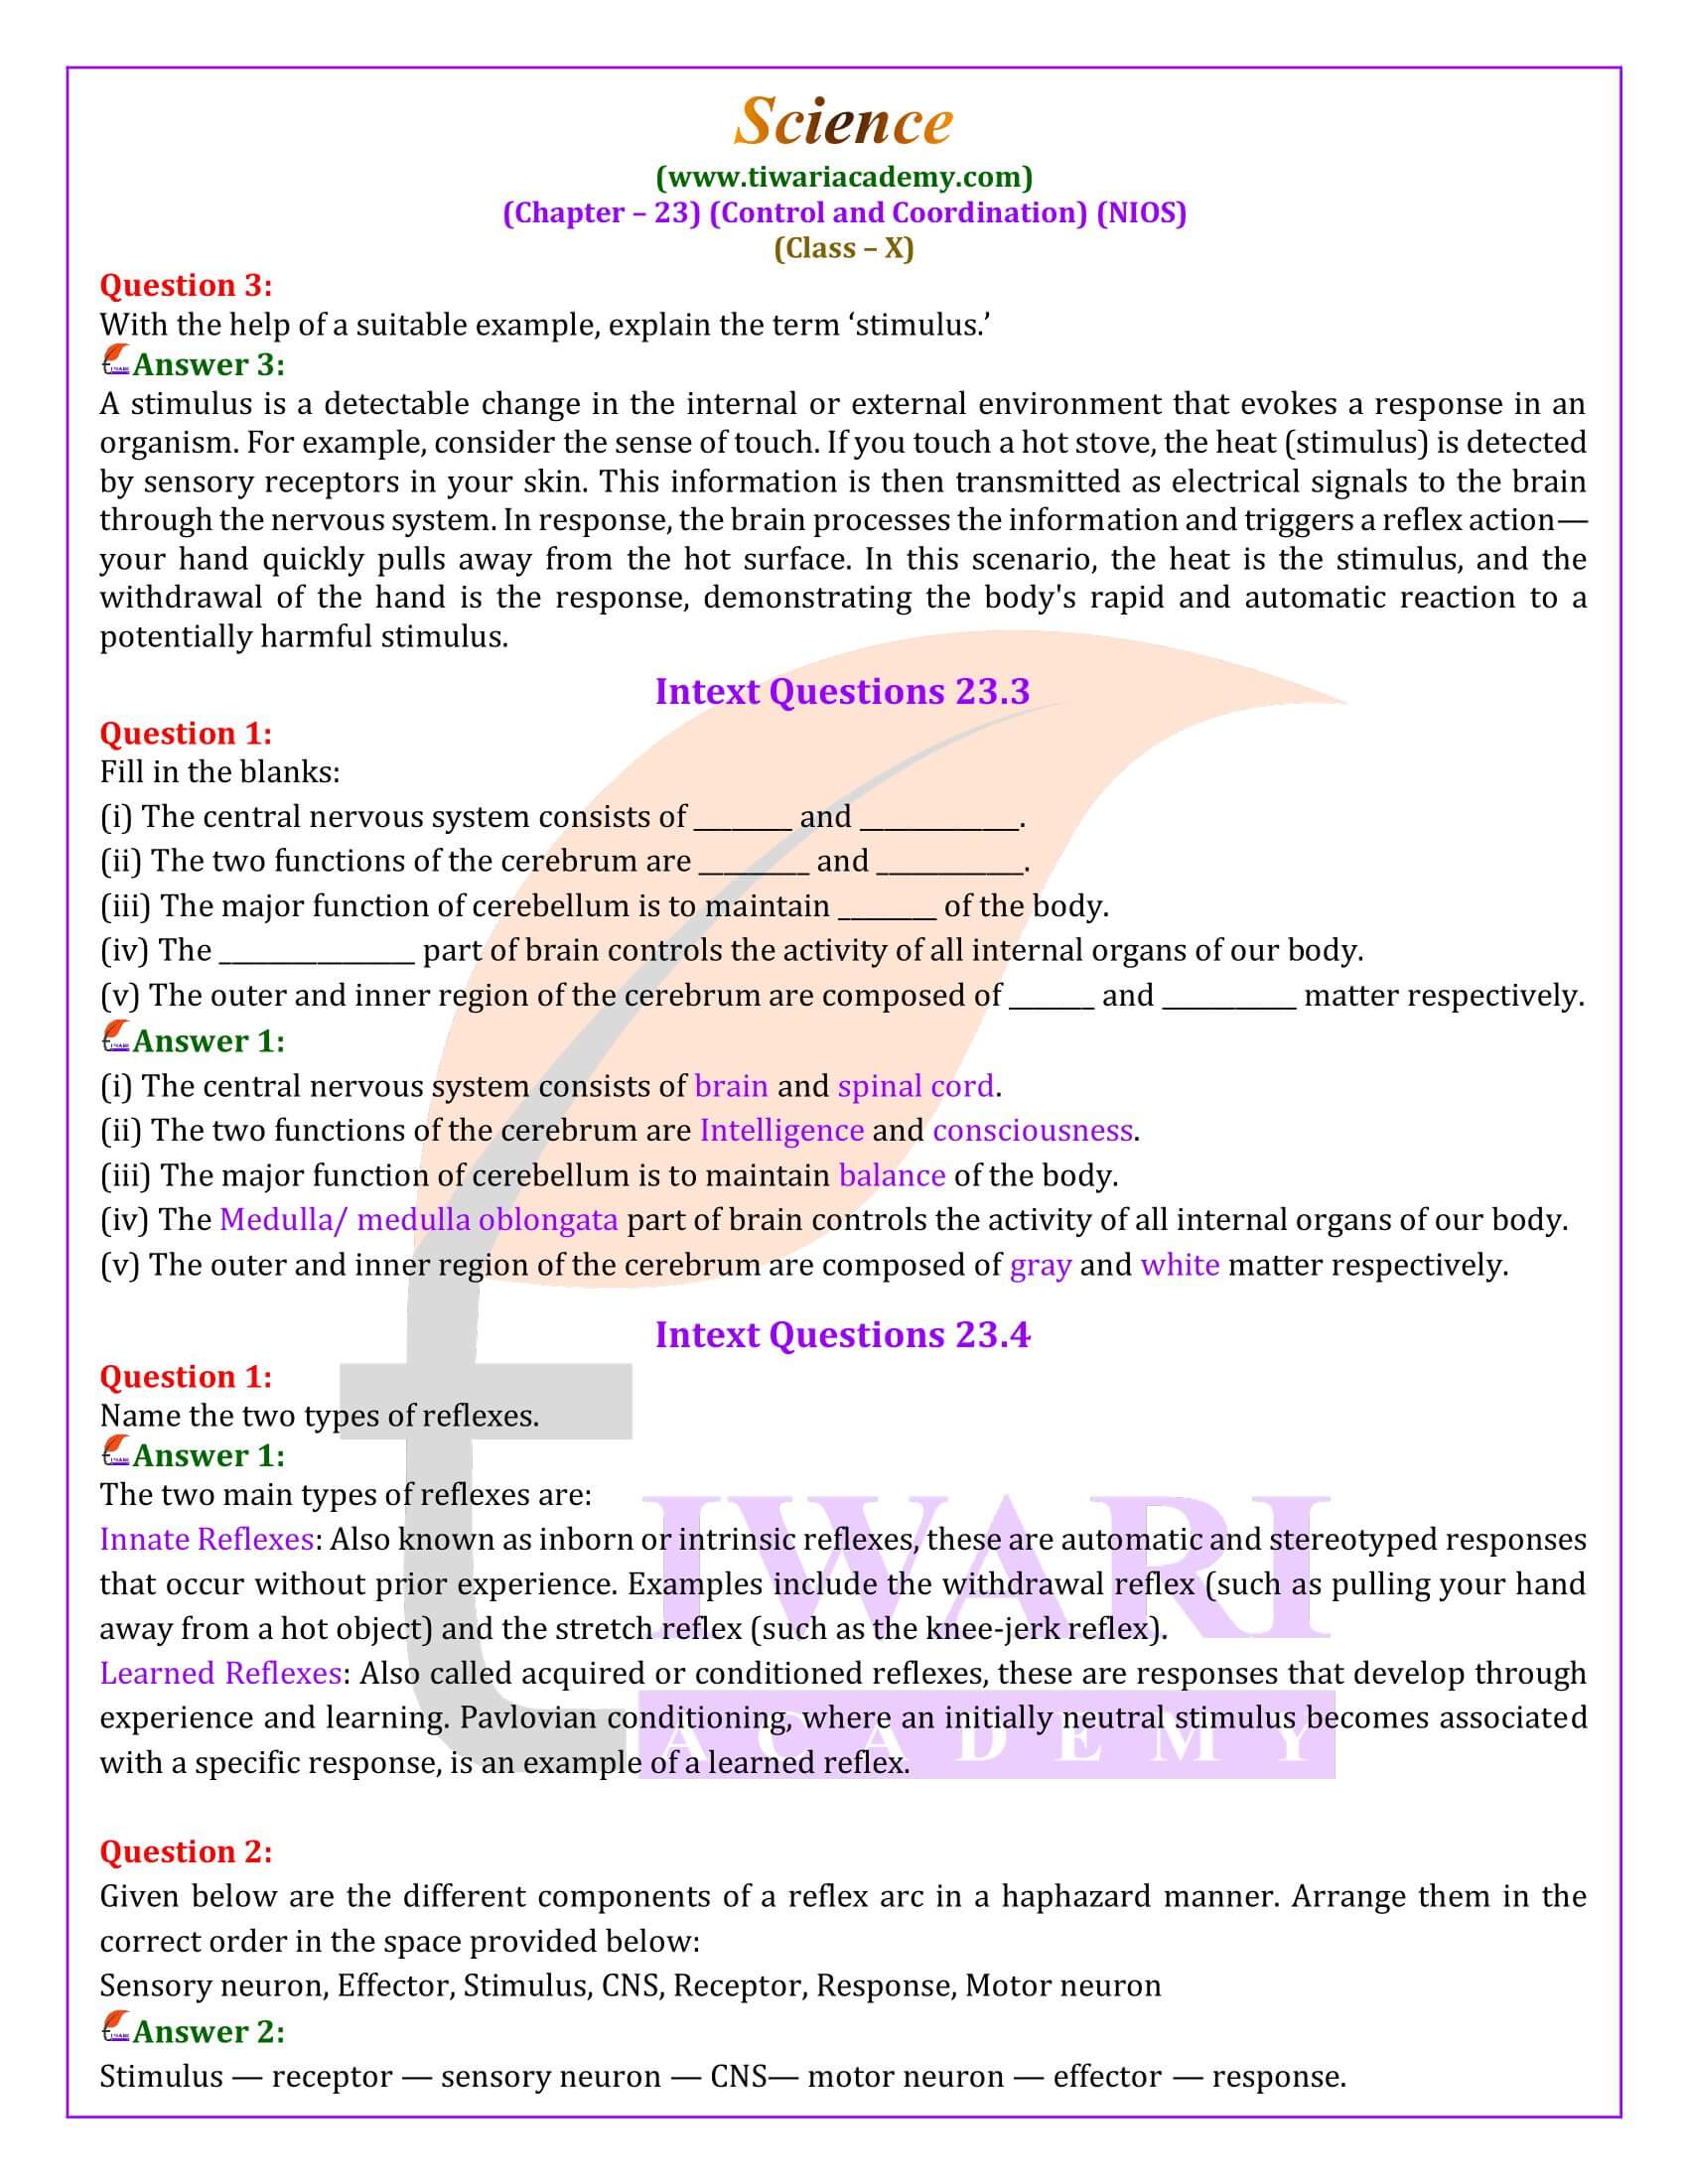 NIOS Class 10 Science Chapter 23 Control and Coordination